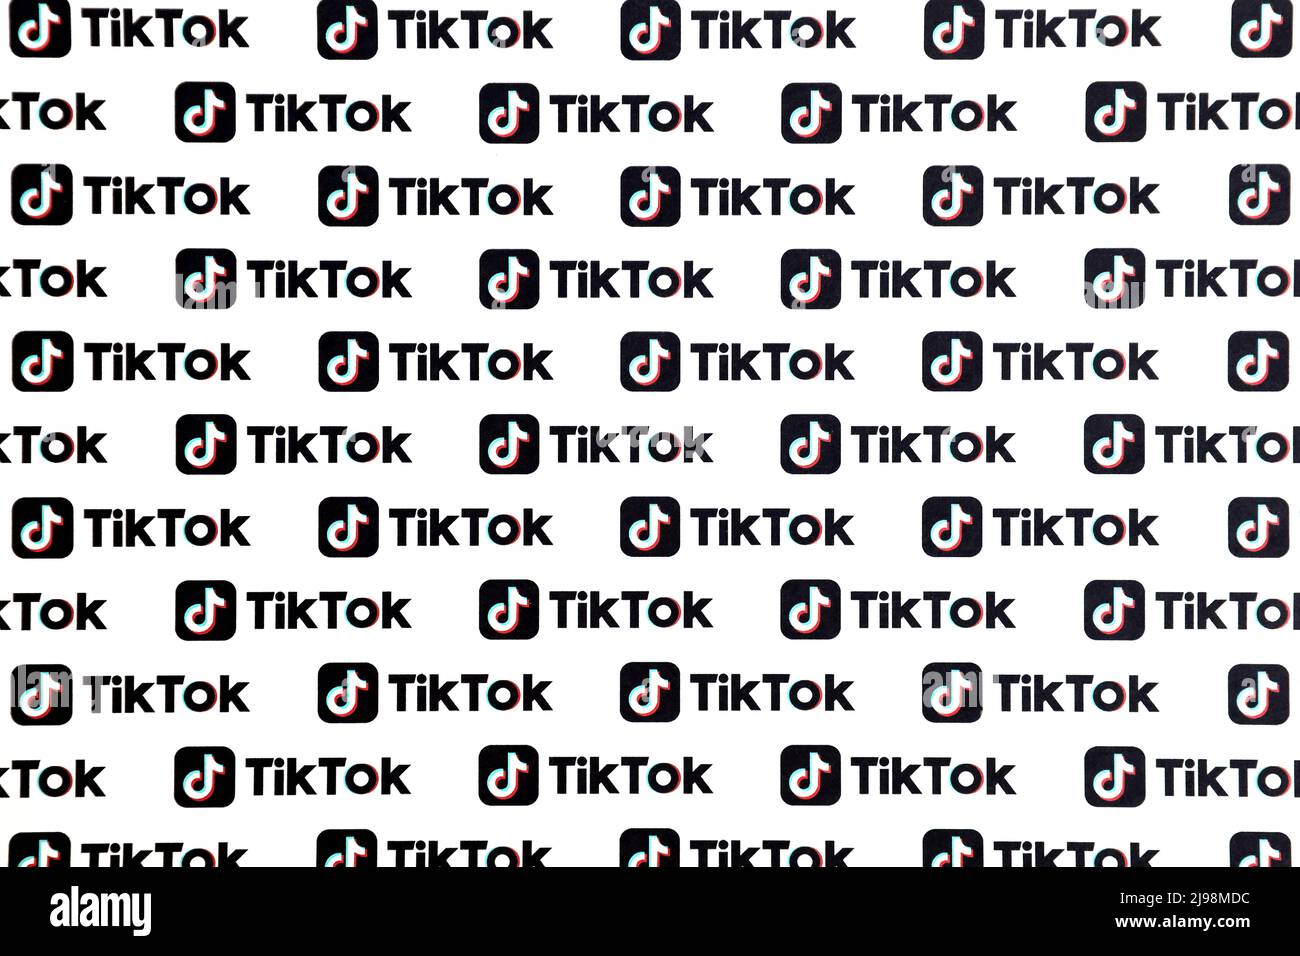 TERNOPIL, UKRAINE - MAY 2, 2022: Many TikTok logo printed on paper. Tiktok or Douyin is a famous Chinese short-form video hosting service owned by Byt Stock Photo